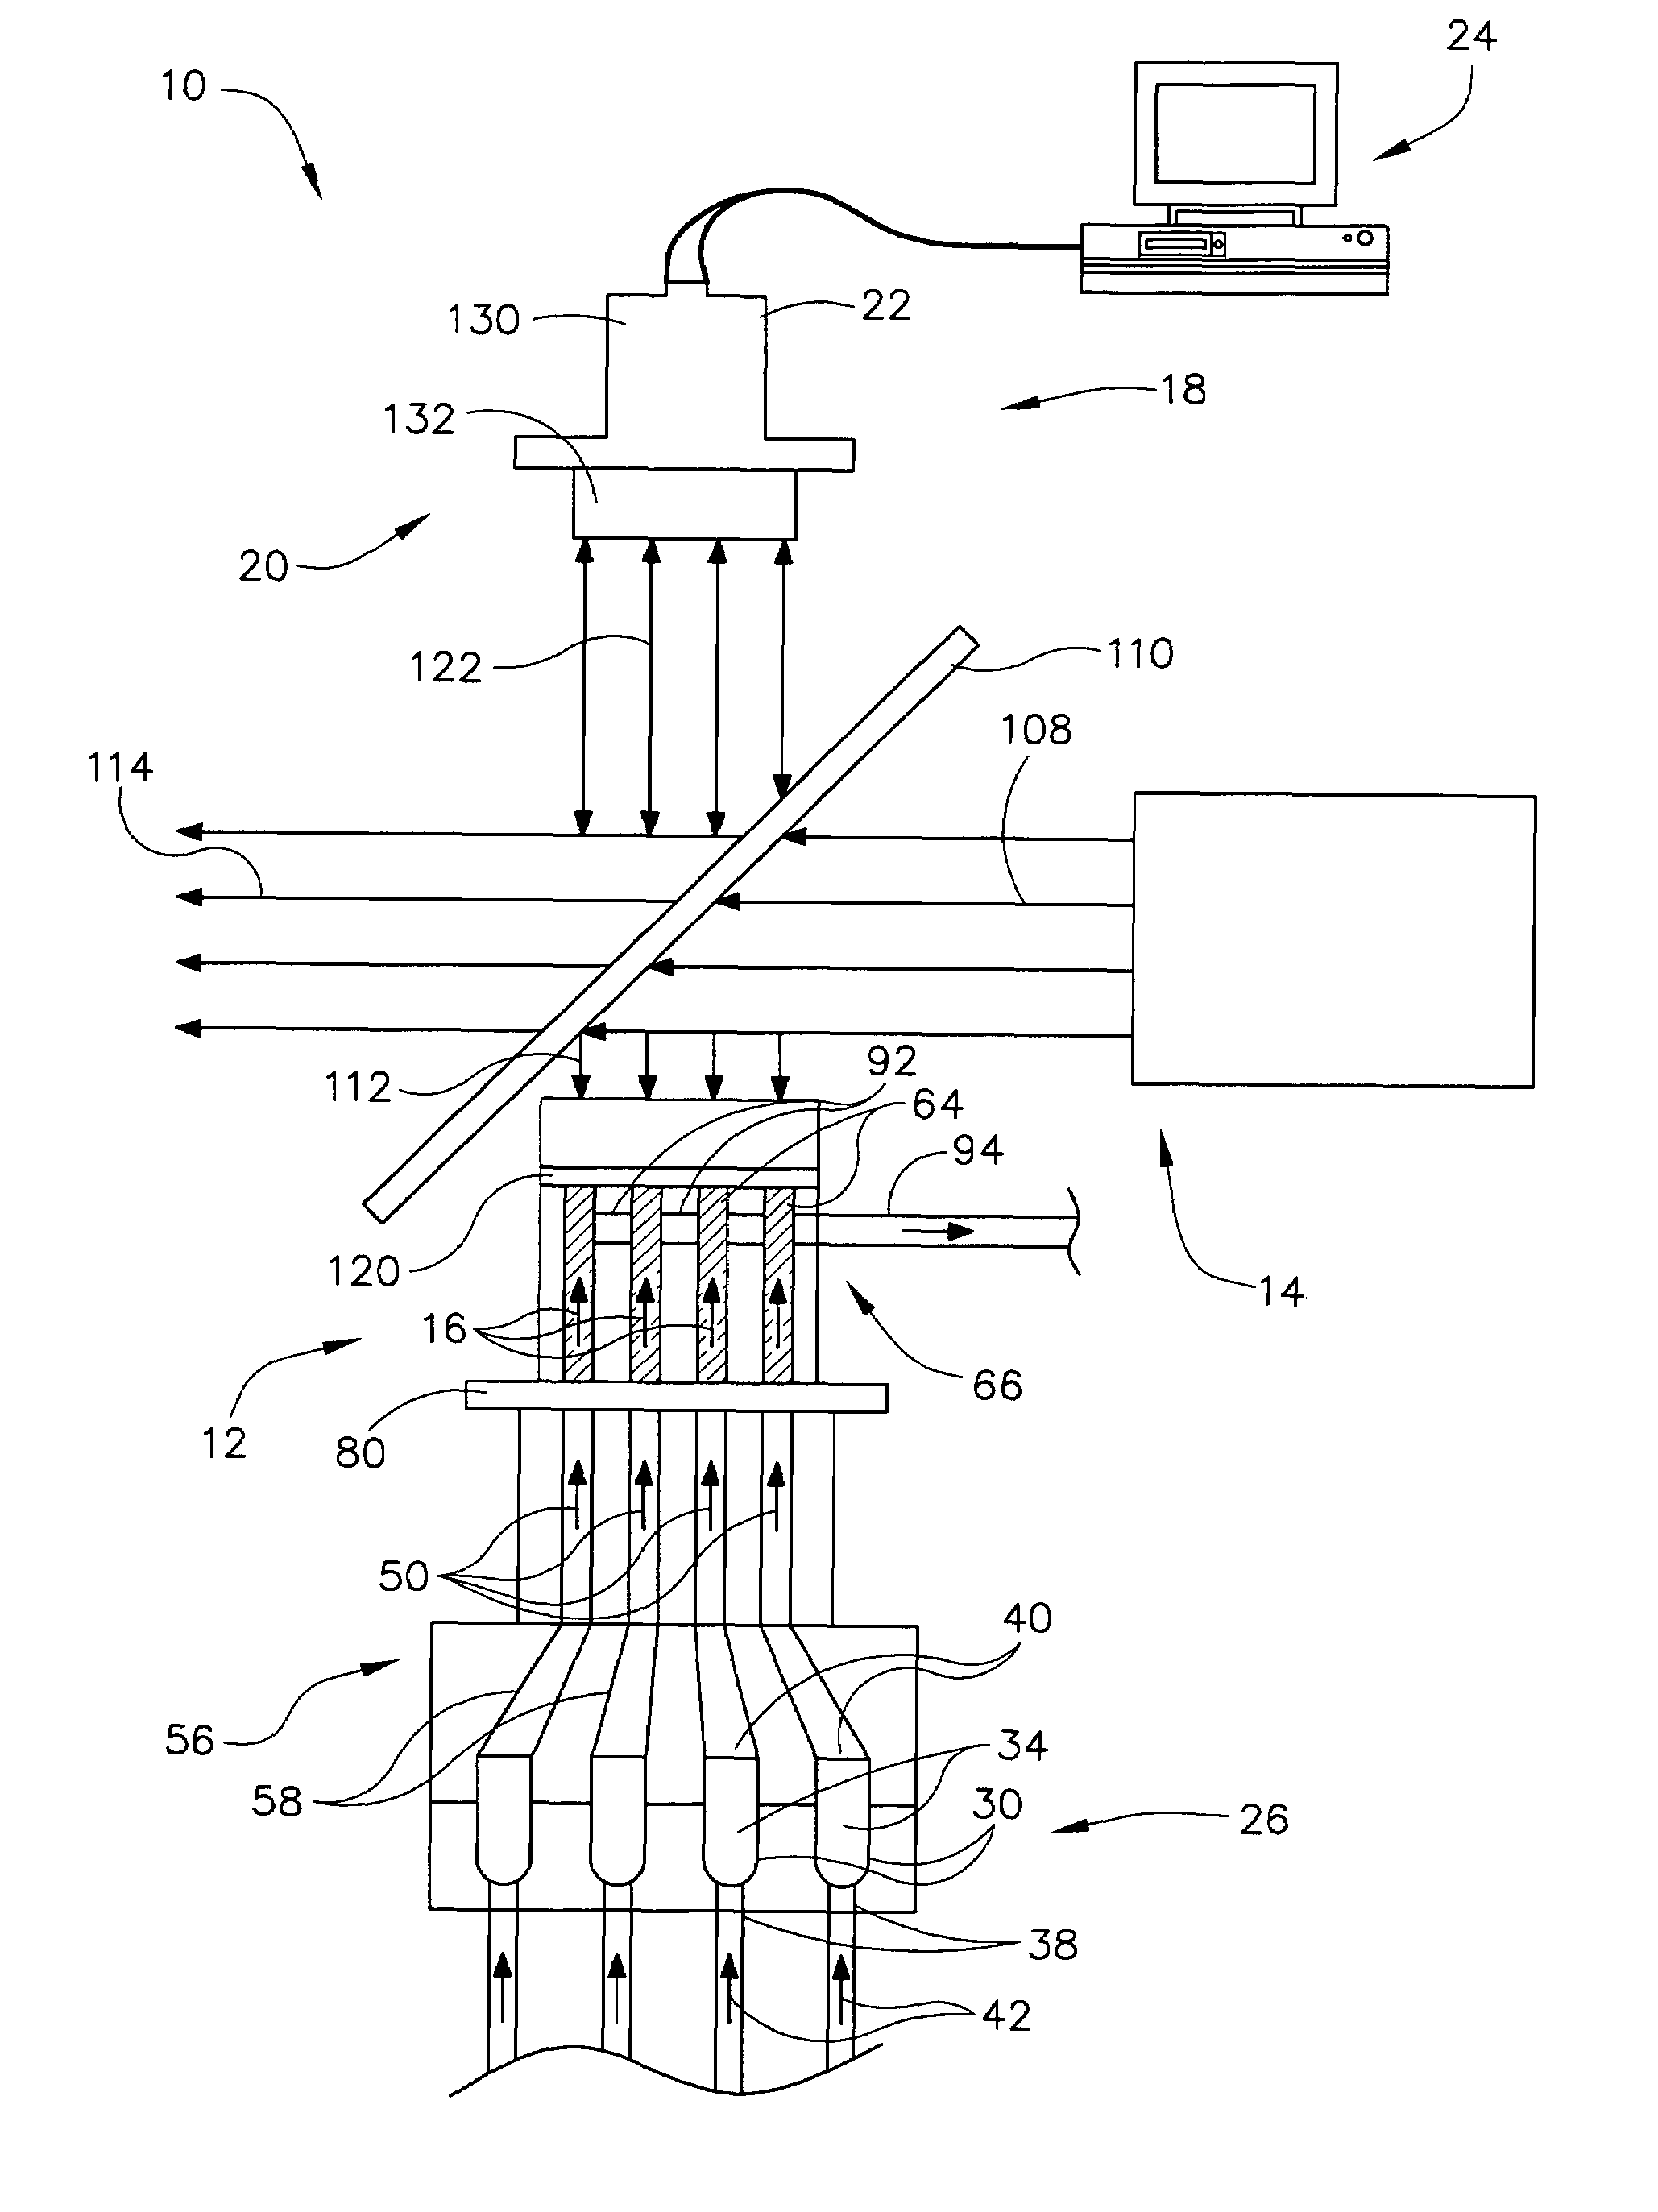 Parallel infrared spectroscopy apparatus and method